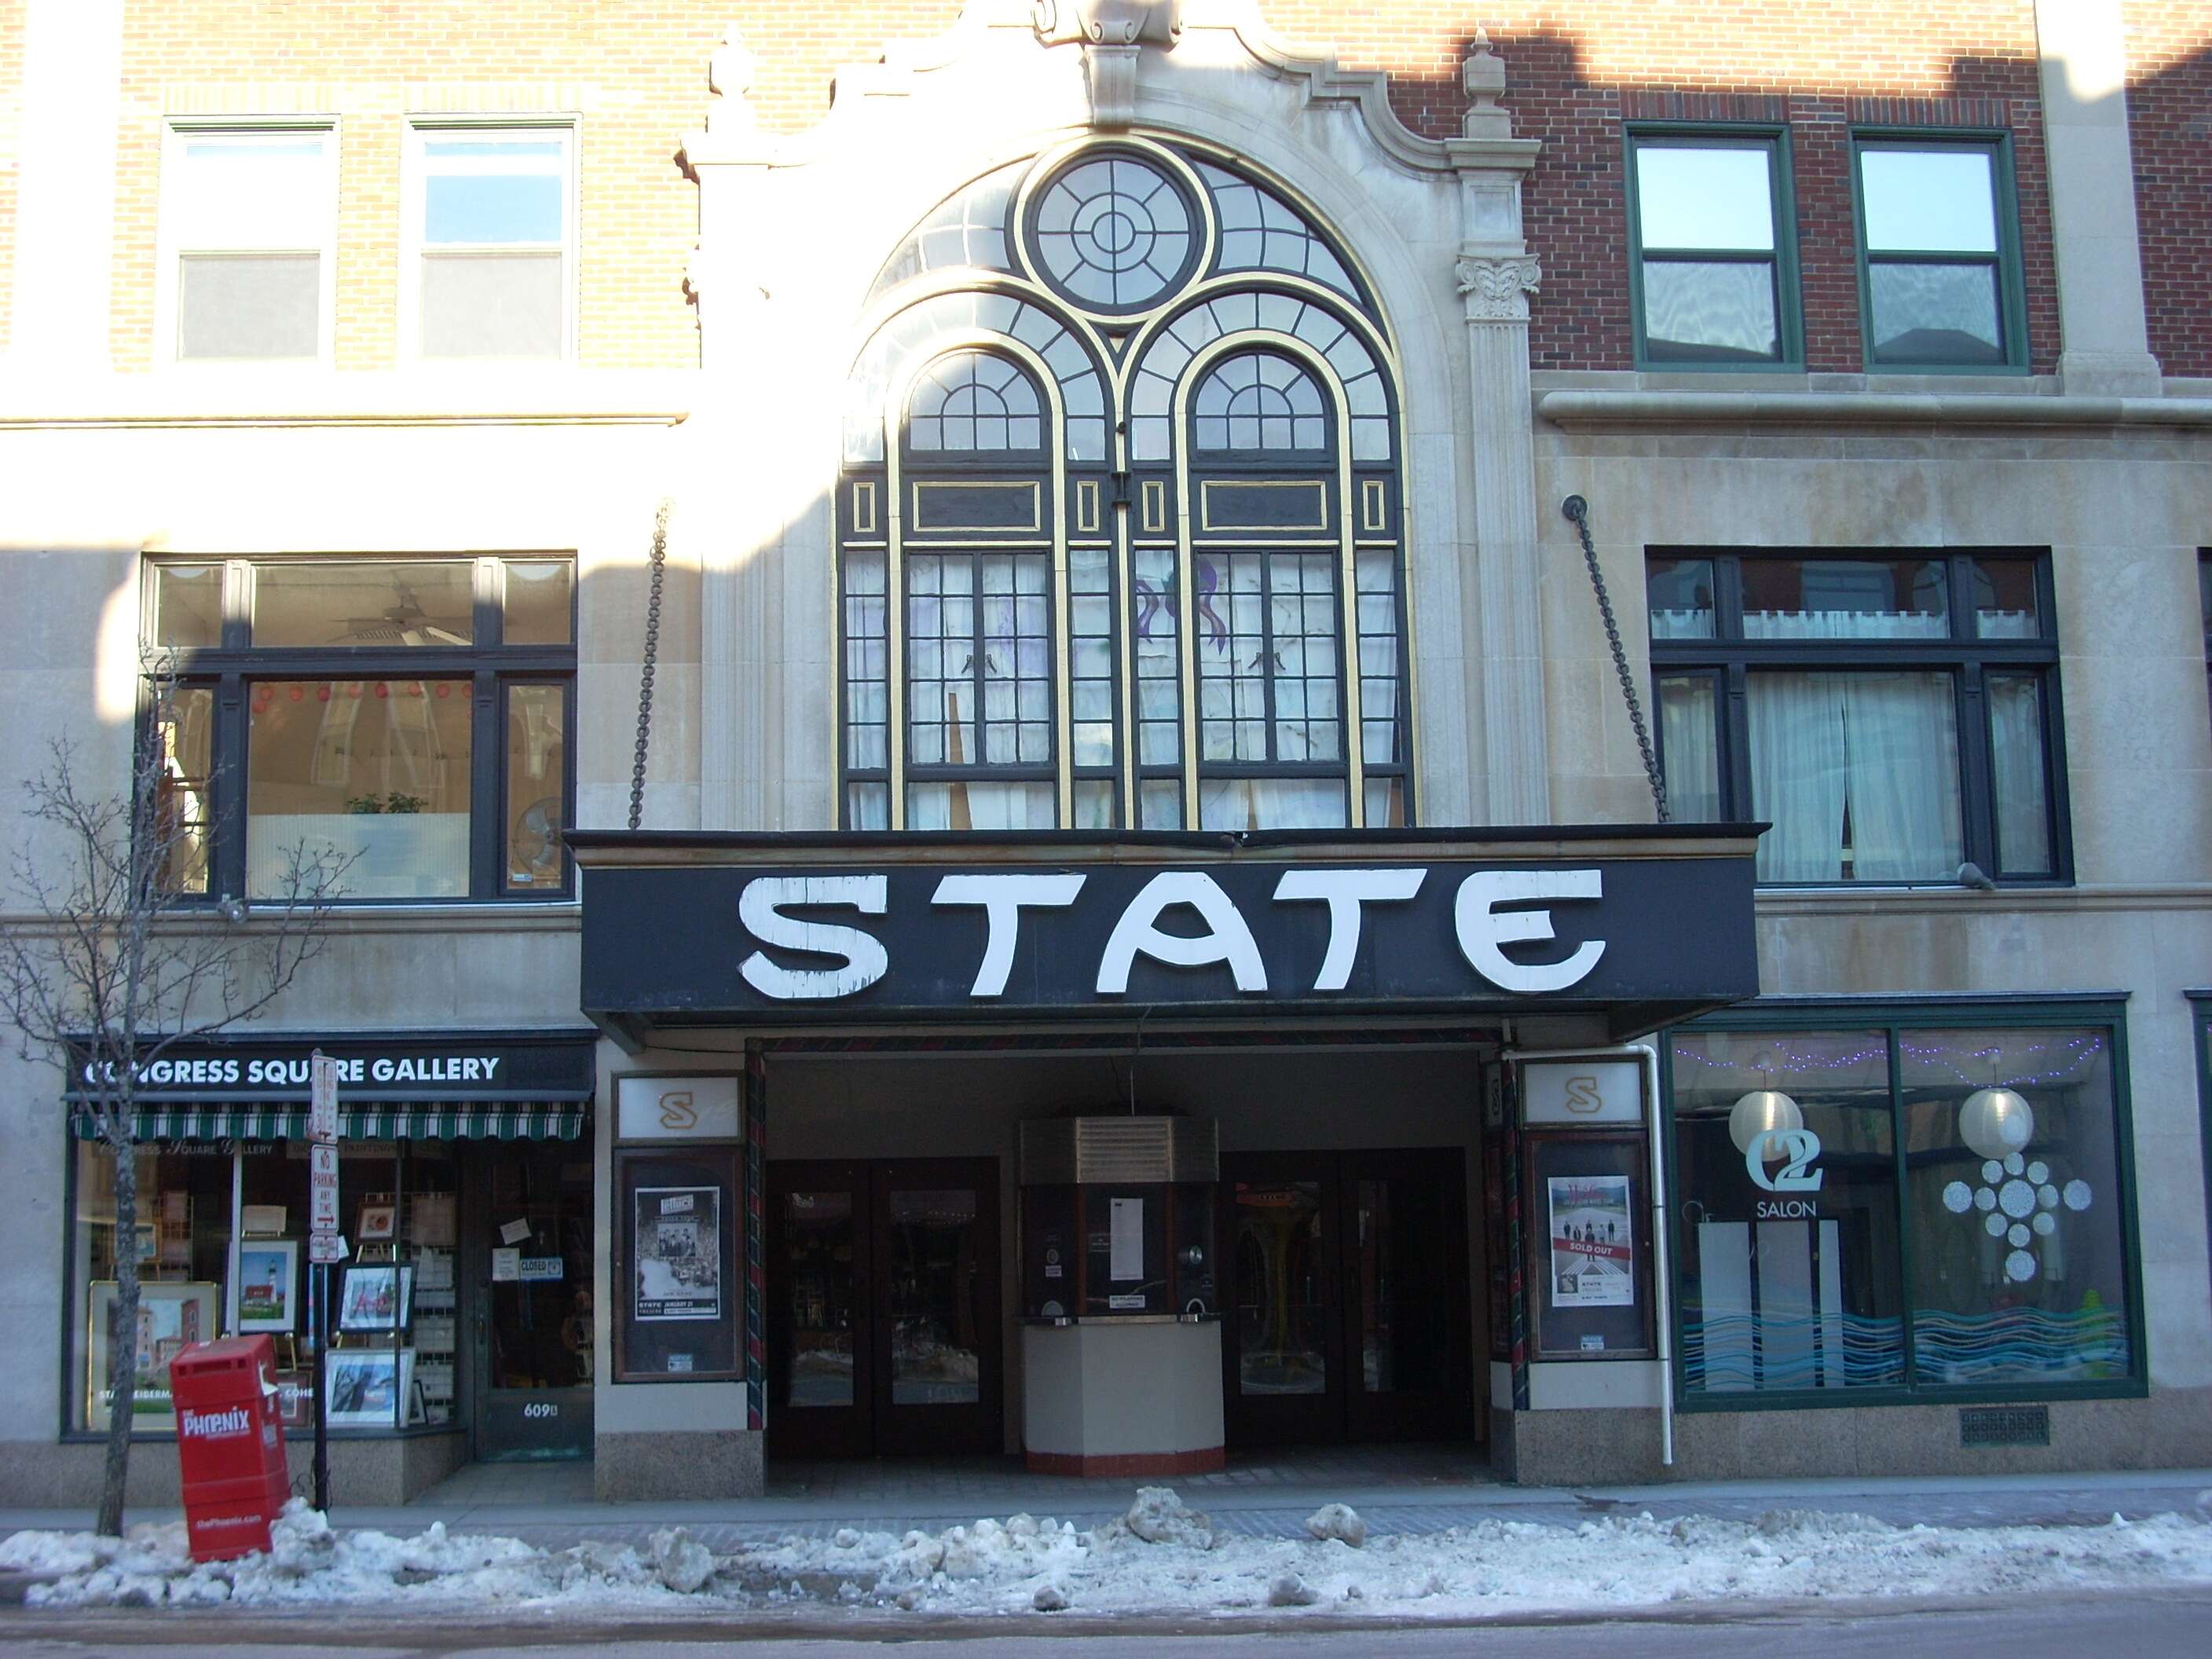 State Theatre facade before the makeover.